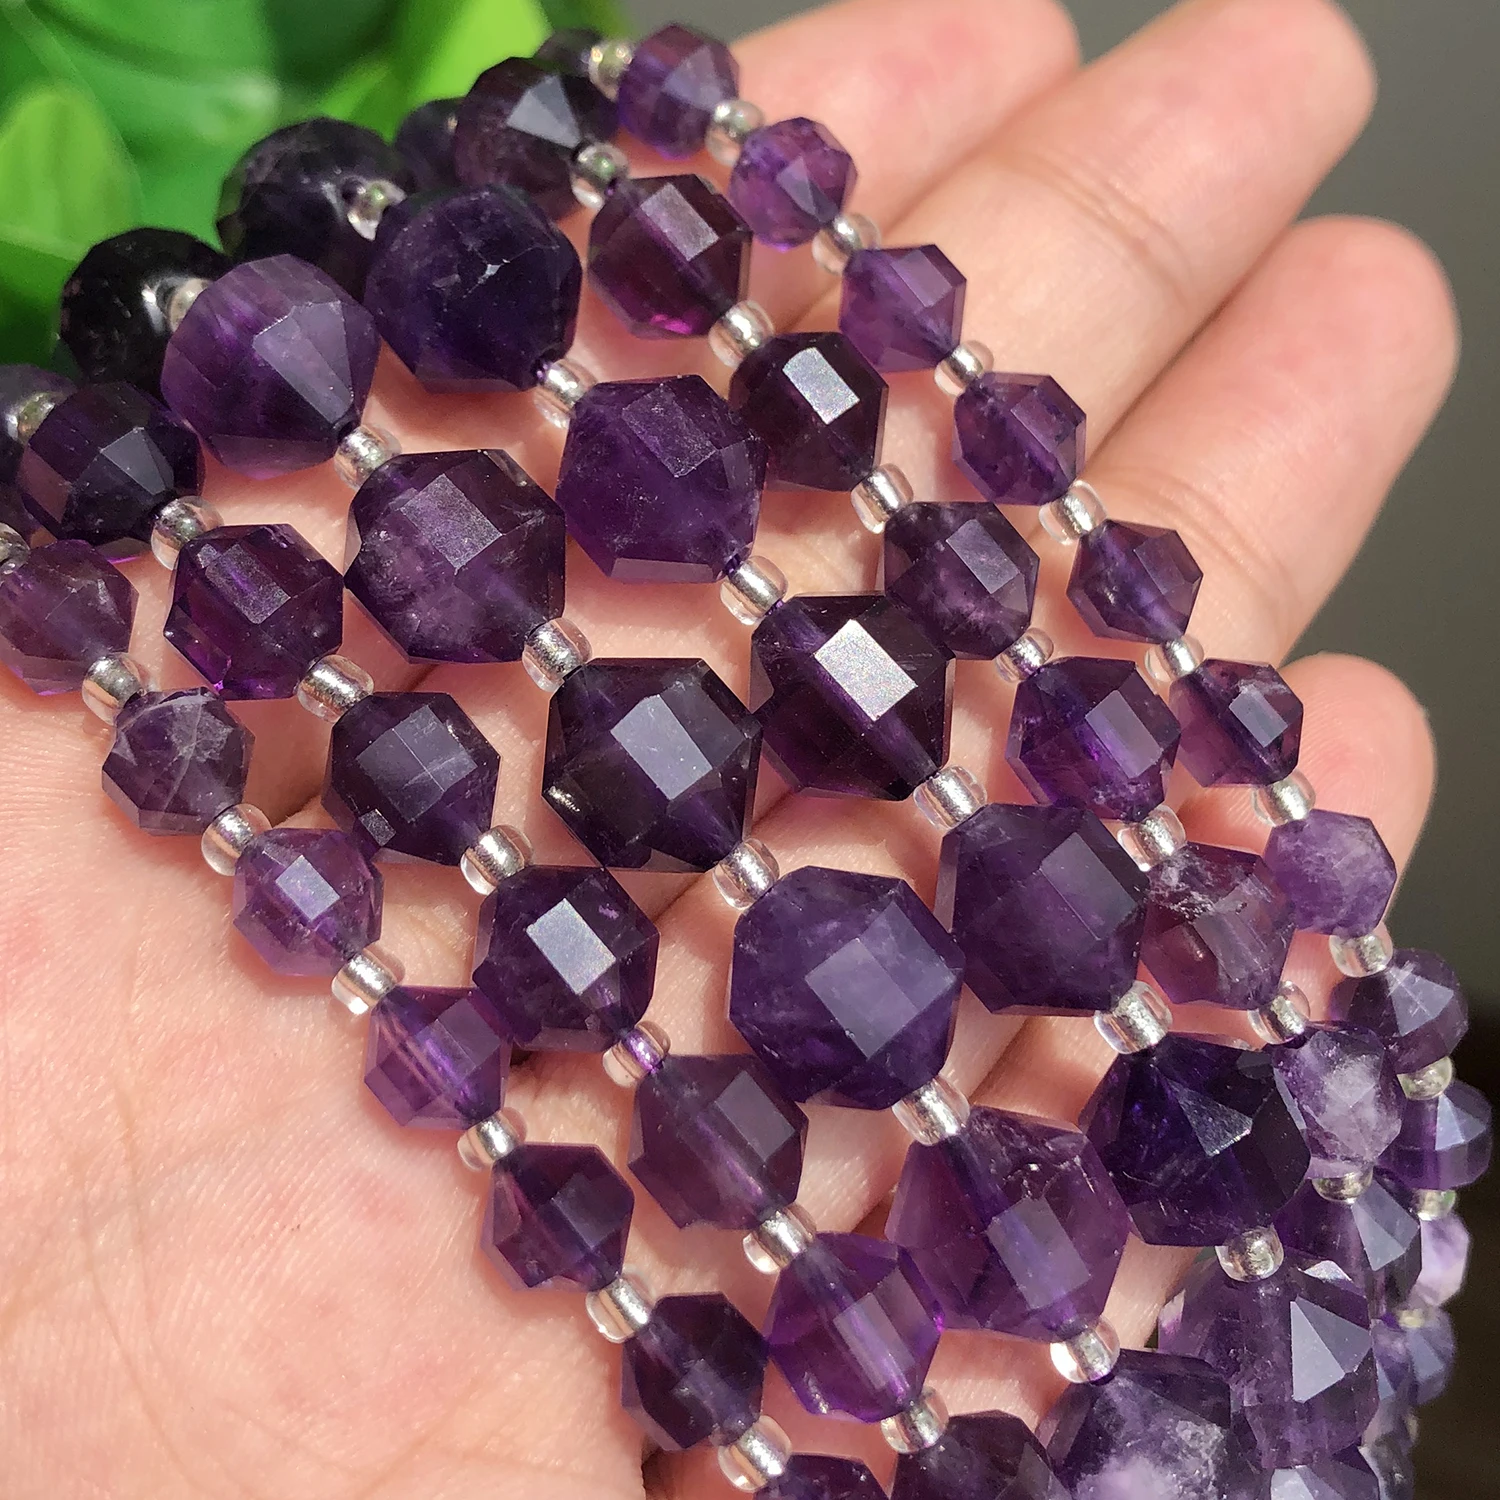 Natural Round Faceted Amethyst Quartz Crystal Spacer Beads Jewelry Making 15"DIY 